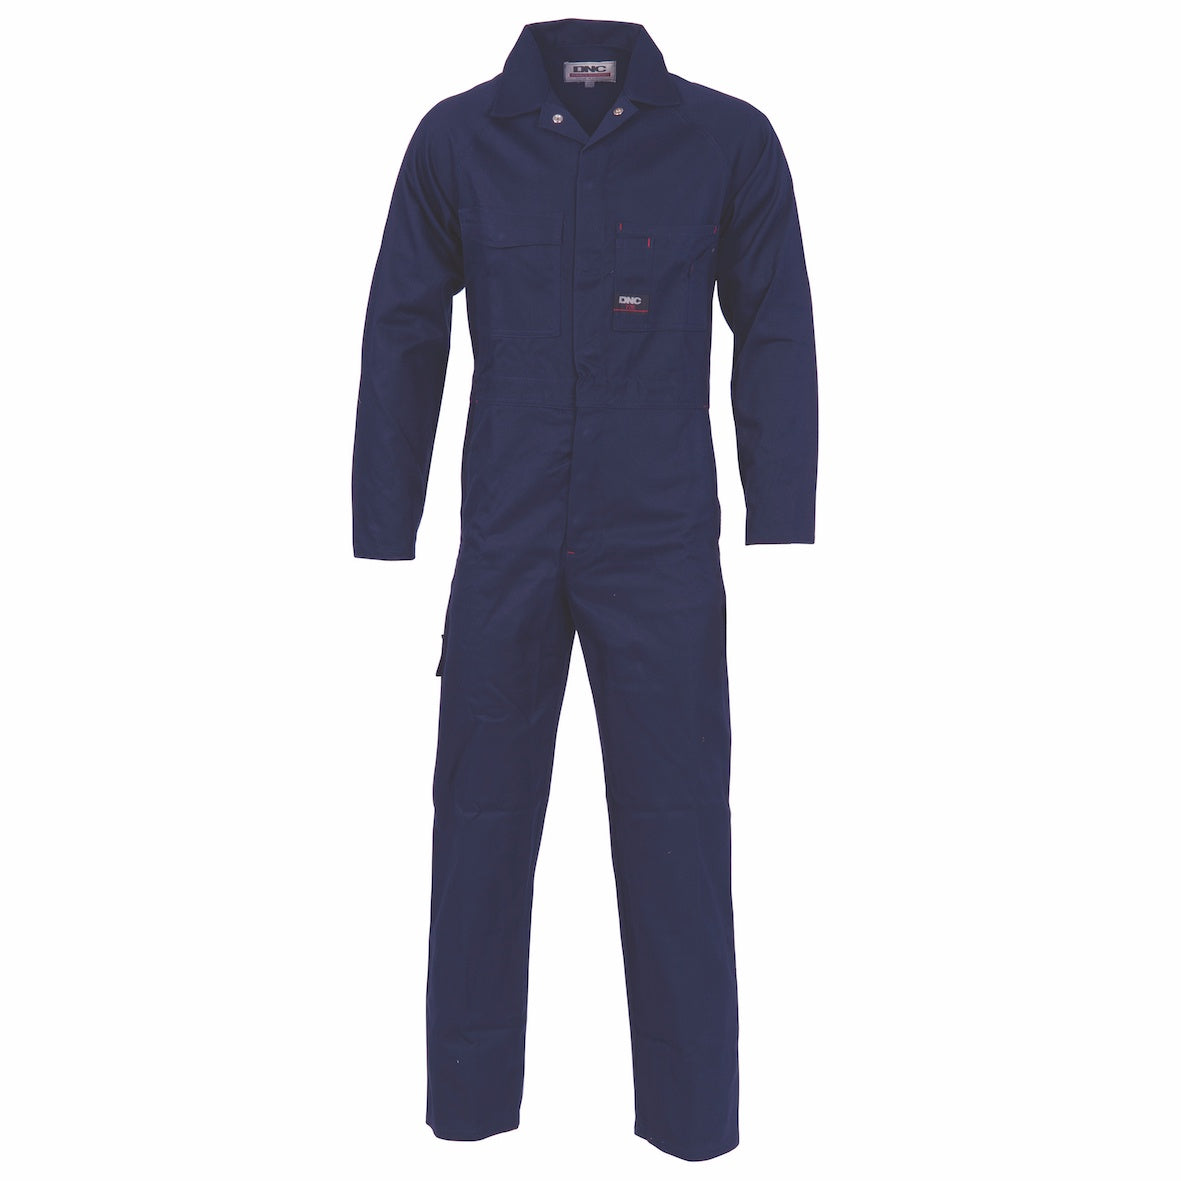 DNC - 3101 - Heavy Weight Cotton Drill Overall